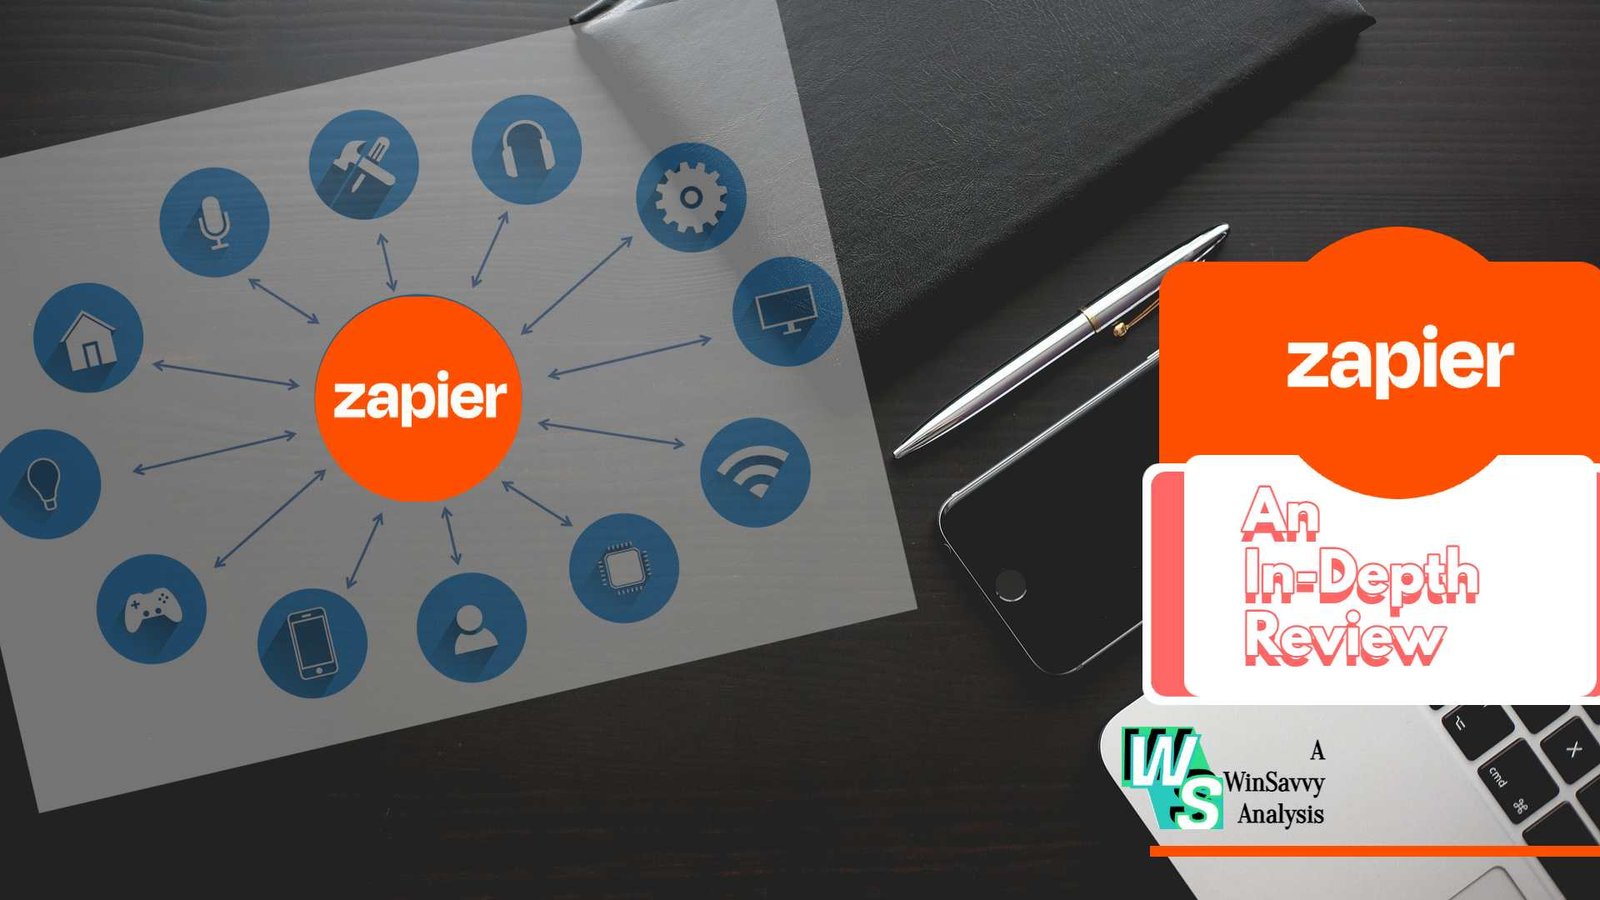 An indepth review of zapier software